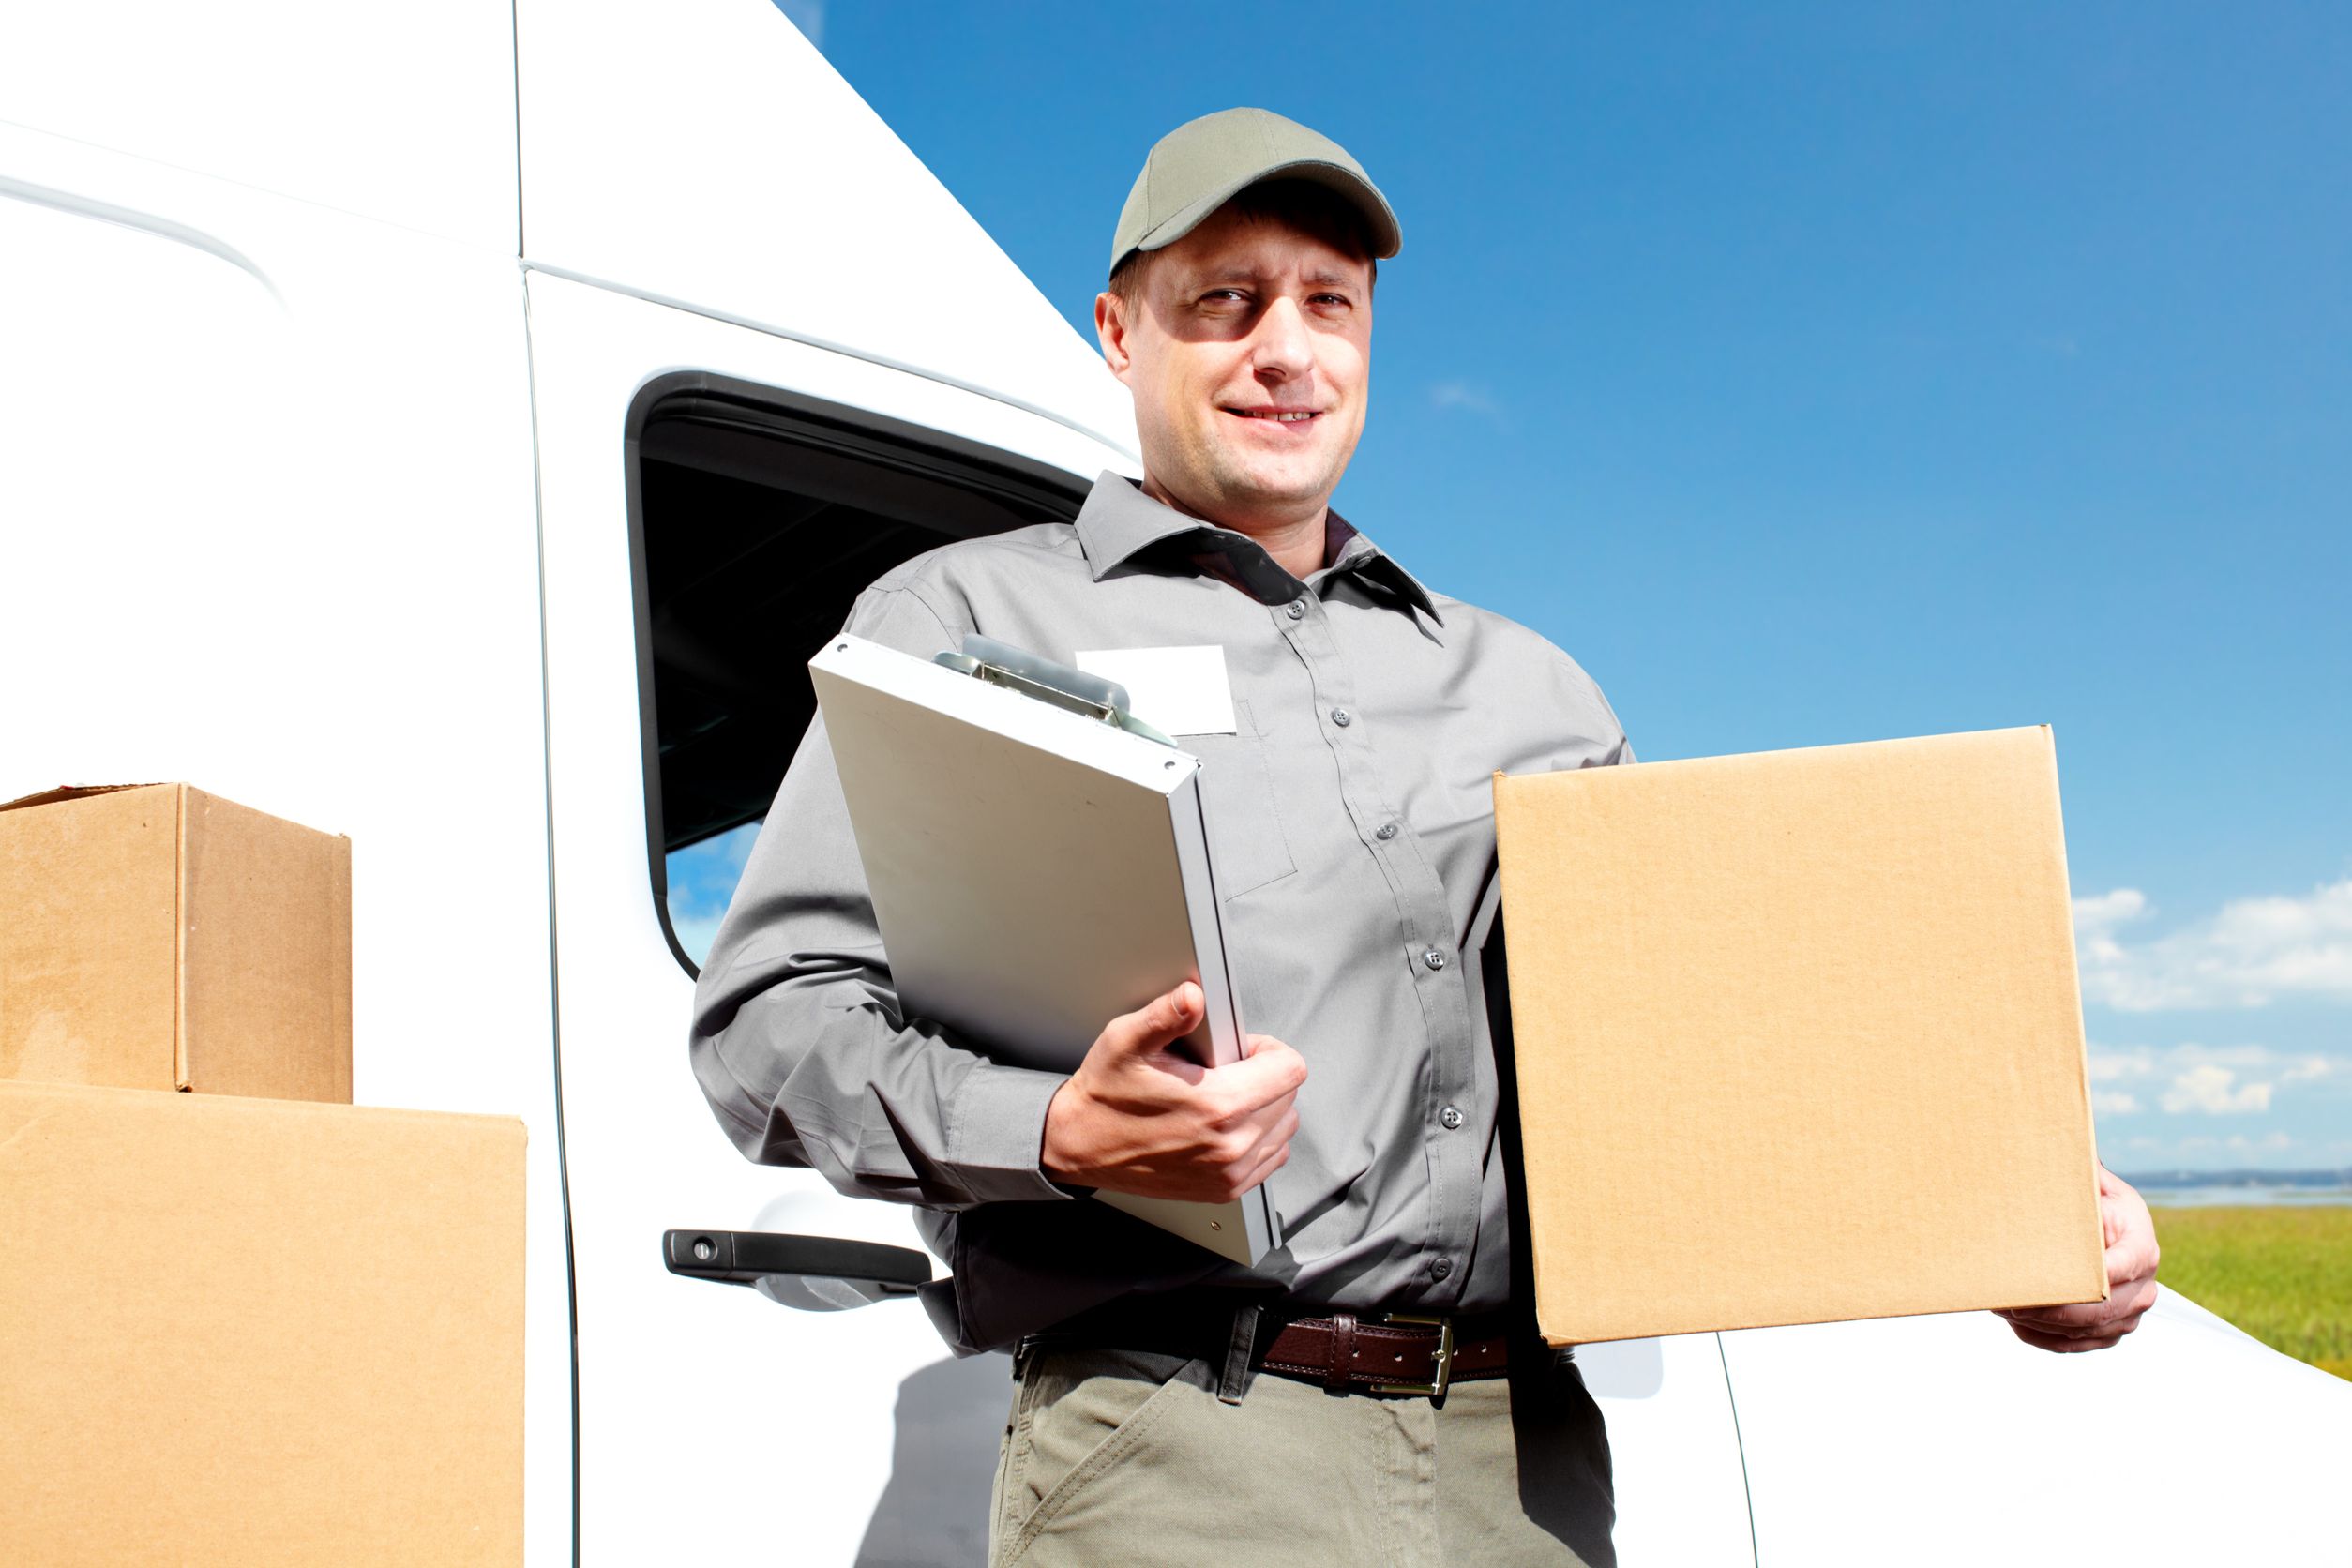 Schedule an Appointment With Professional Movers in Boston MA Today